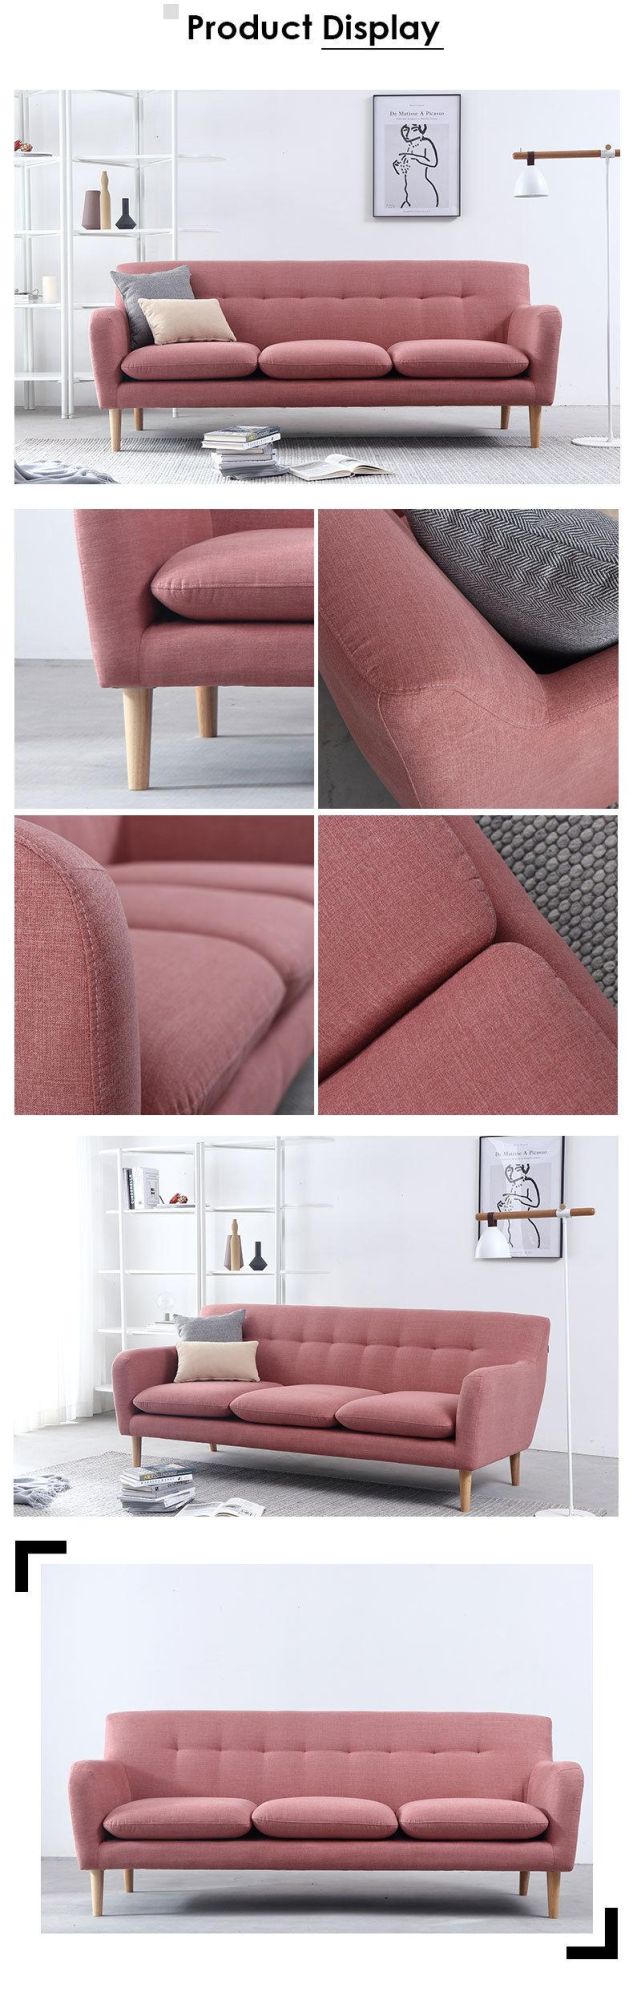 Deep Soft Couches Modern Fabric Furniture Chesterfield Pink Sofa